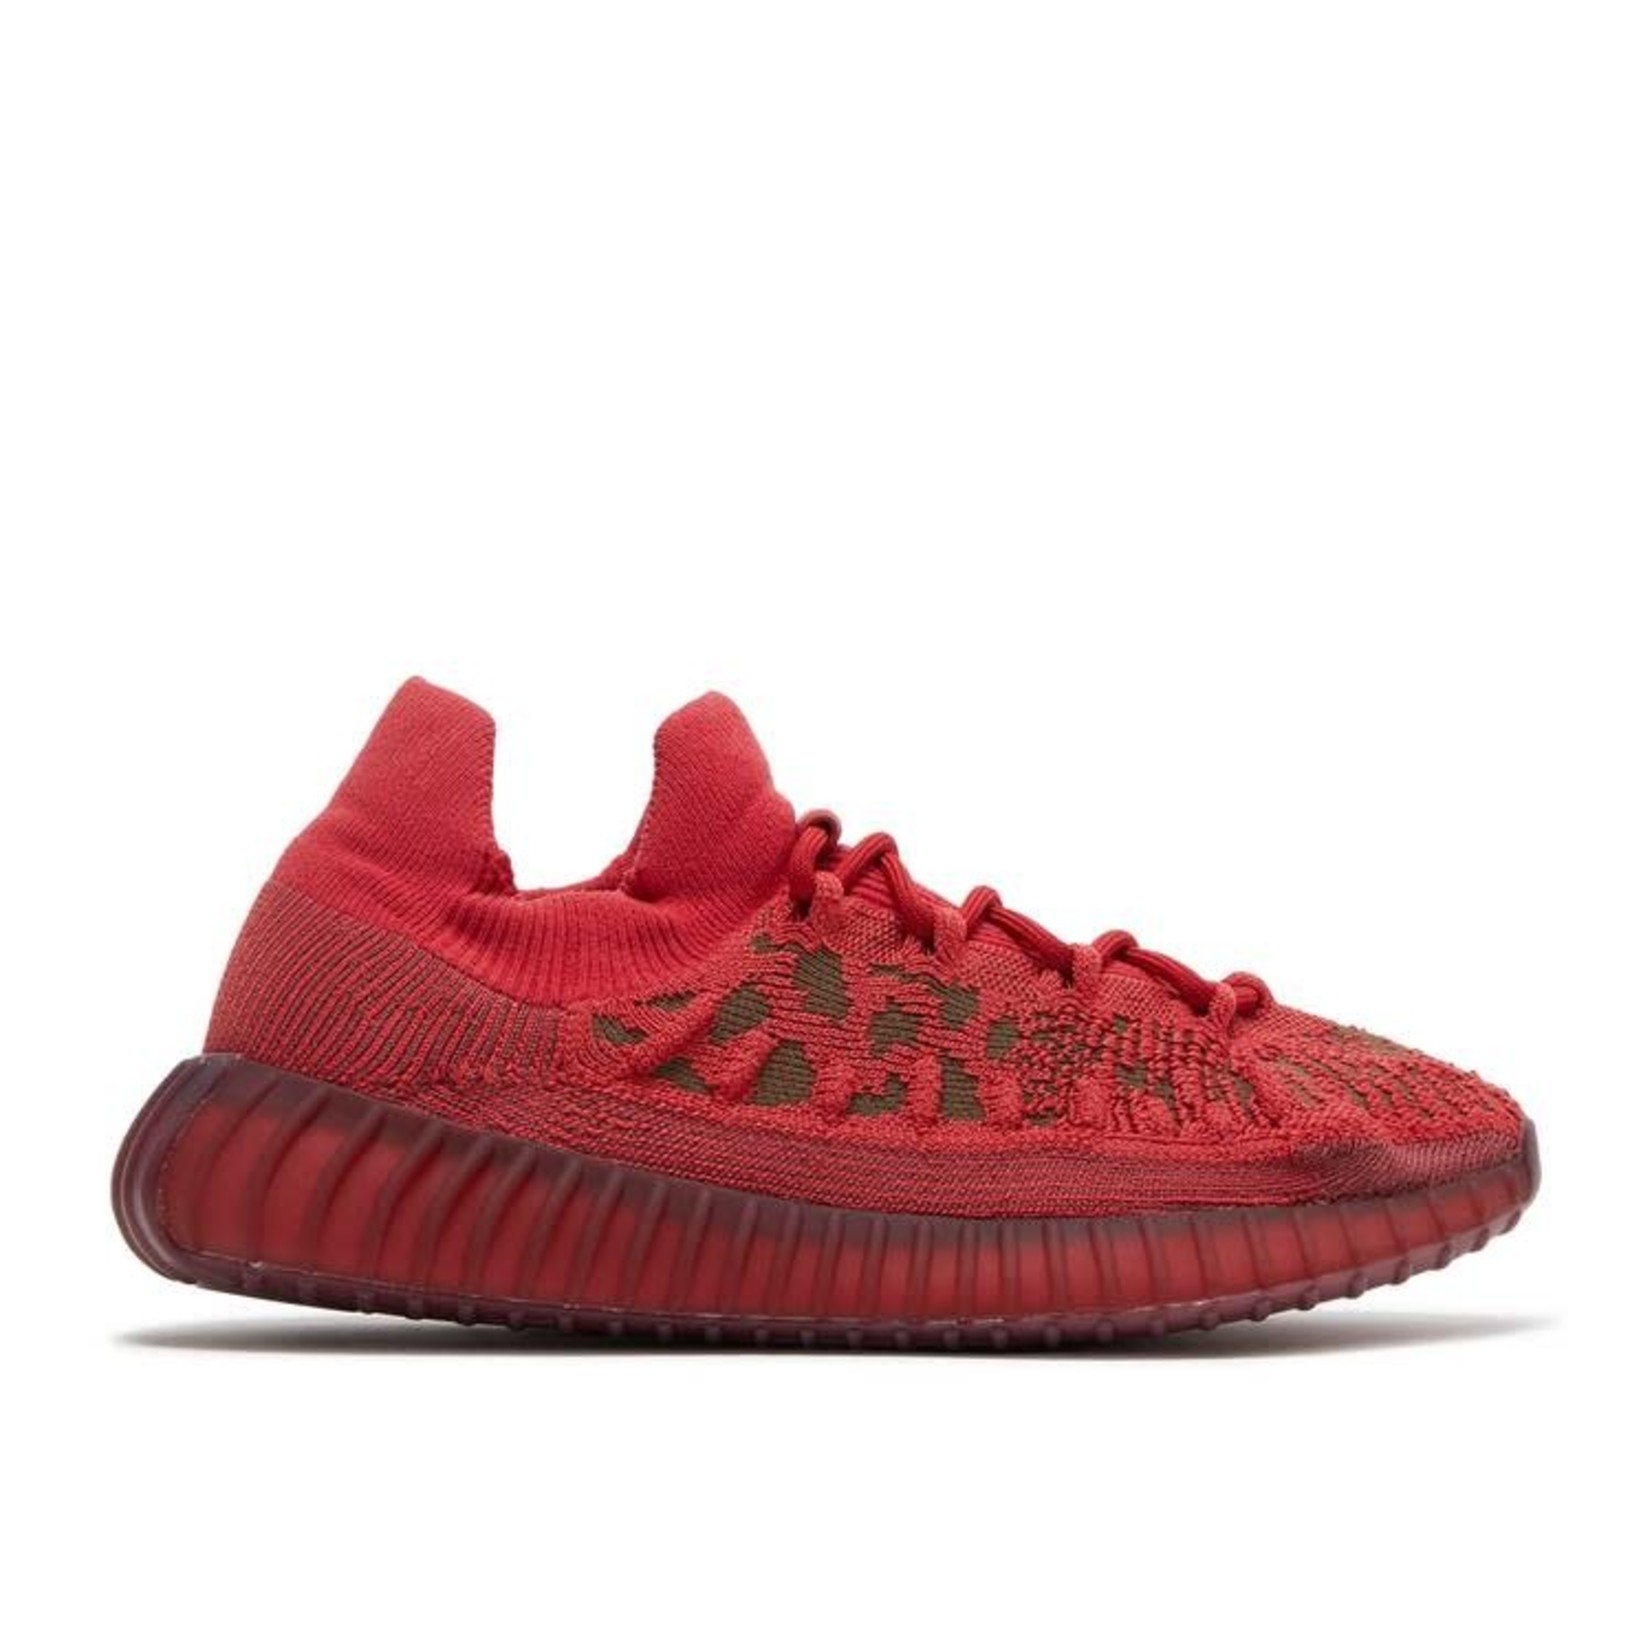 Adidas Adidas Yeezy 350 V2 CMPCT Slate Red Size 5, DS BRAND NEW